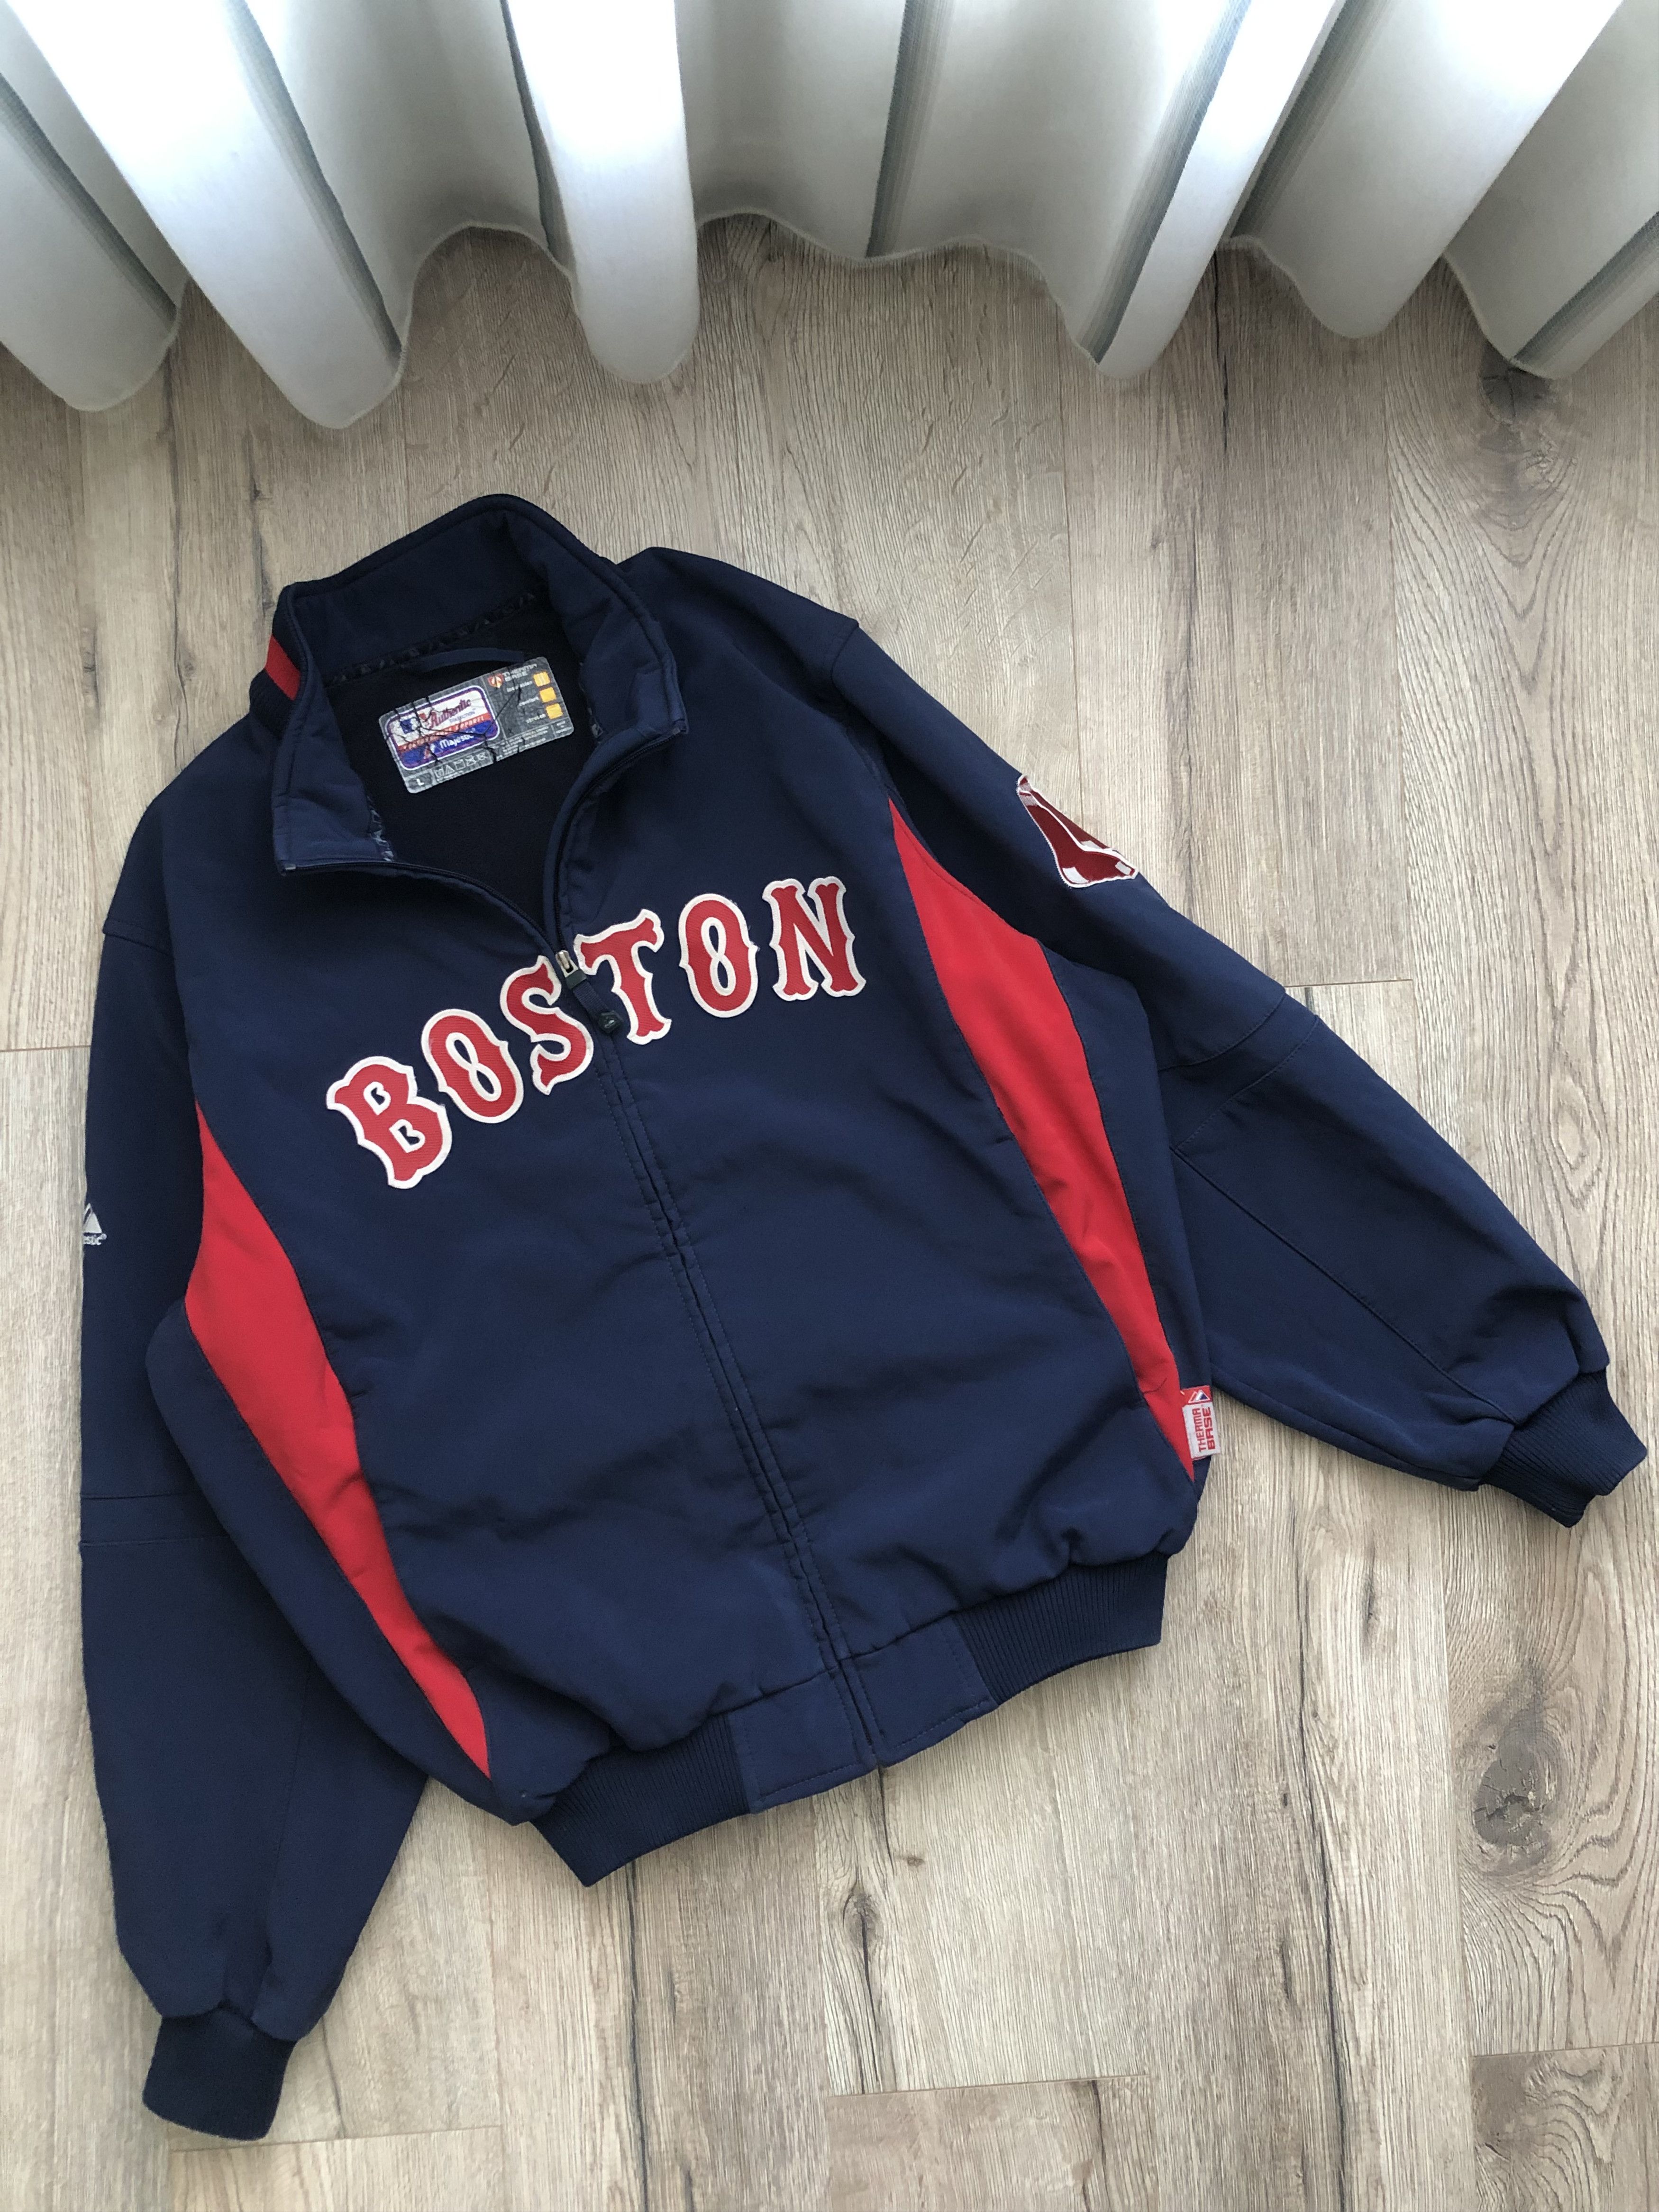 Boston Red Sox Majestic Jacket | Grailed